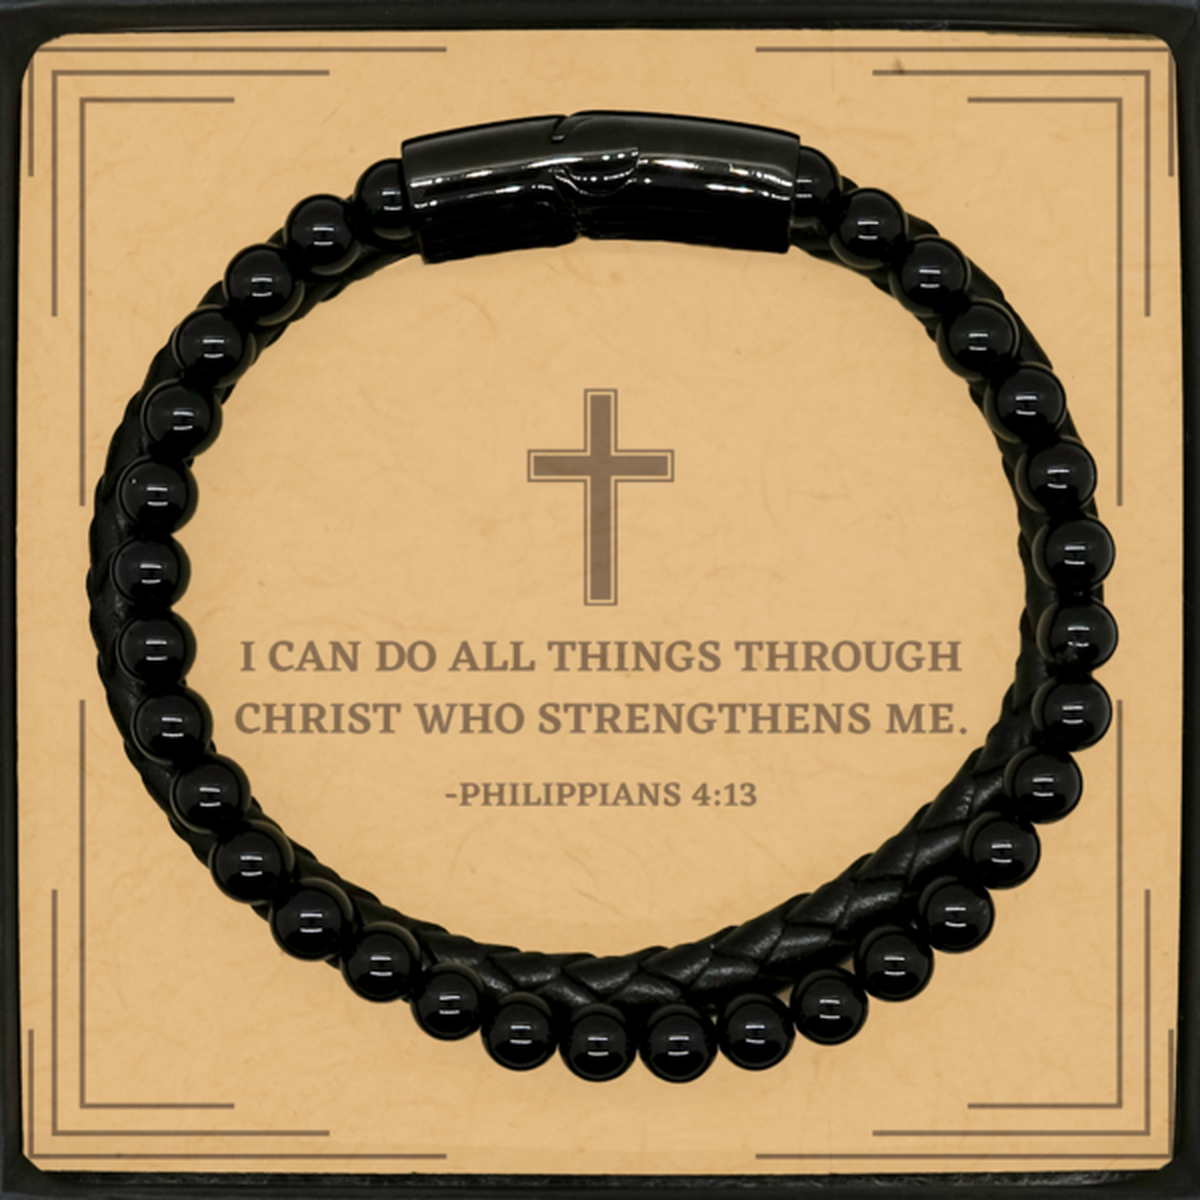 Baptism Gifts For Teenage Boys Girls, Christian Bible Verse Stone Leather Bracelet, I can do all things through Christ, Confirmation Gifts, Bible Verse Card for Son, Godson, Grandson